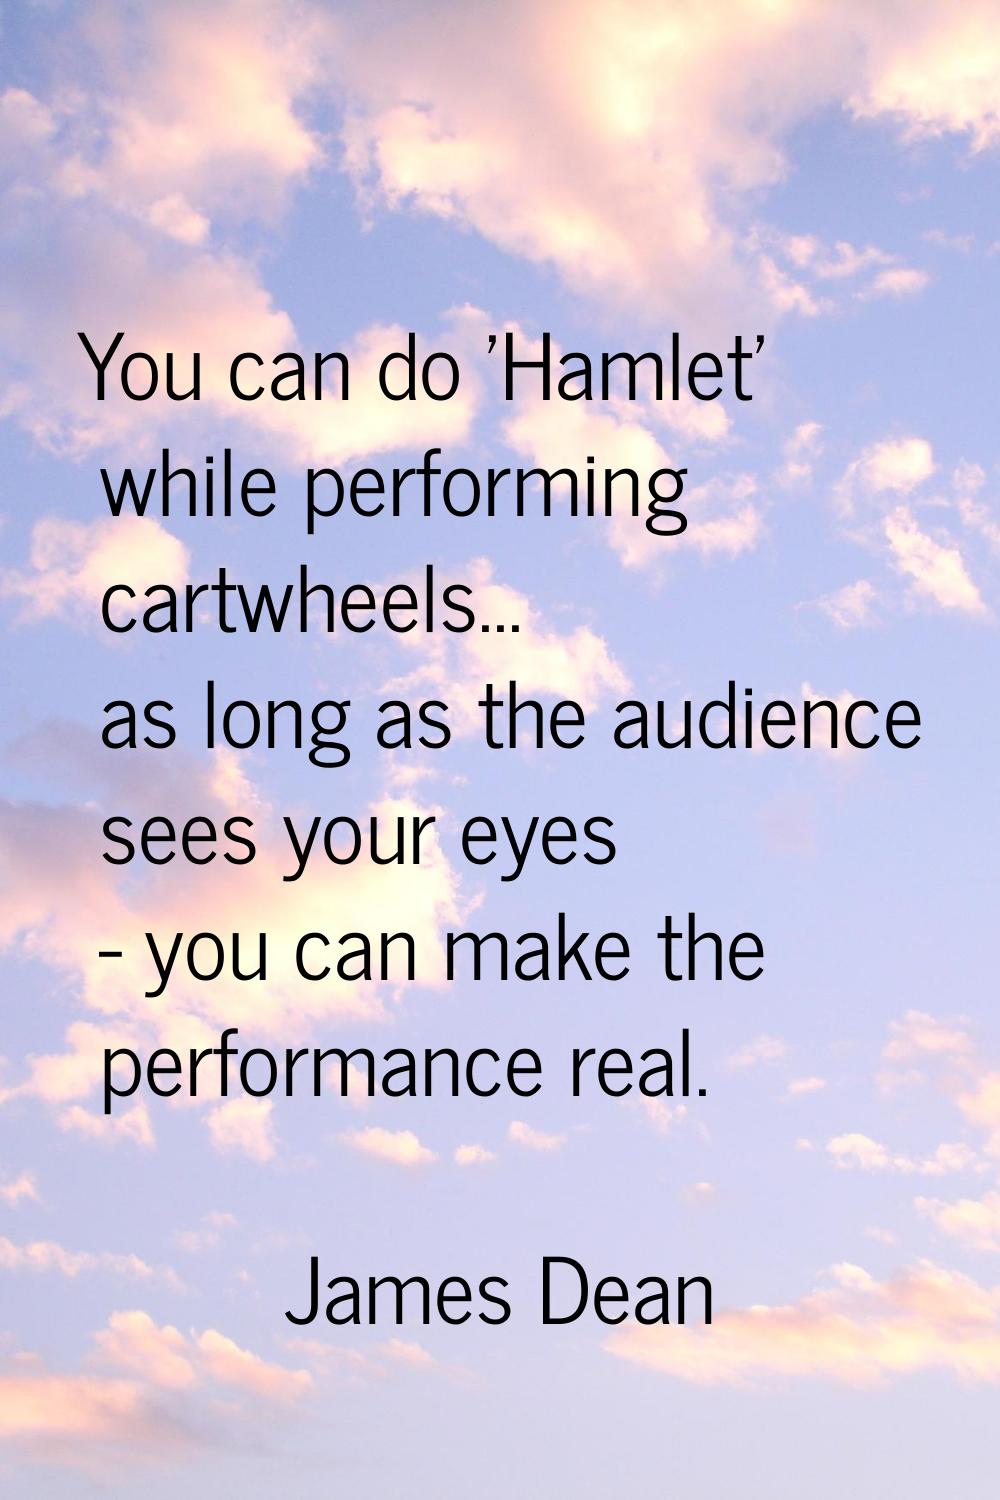 You can do 'Hamlet' while performing cartwheels... as long as the audience sees your eyes - you can